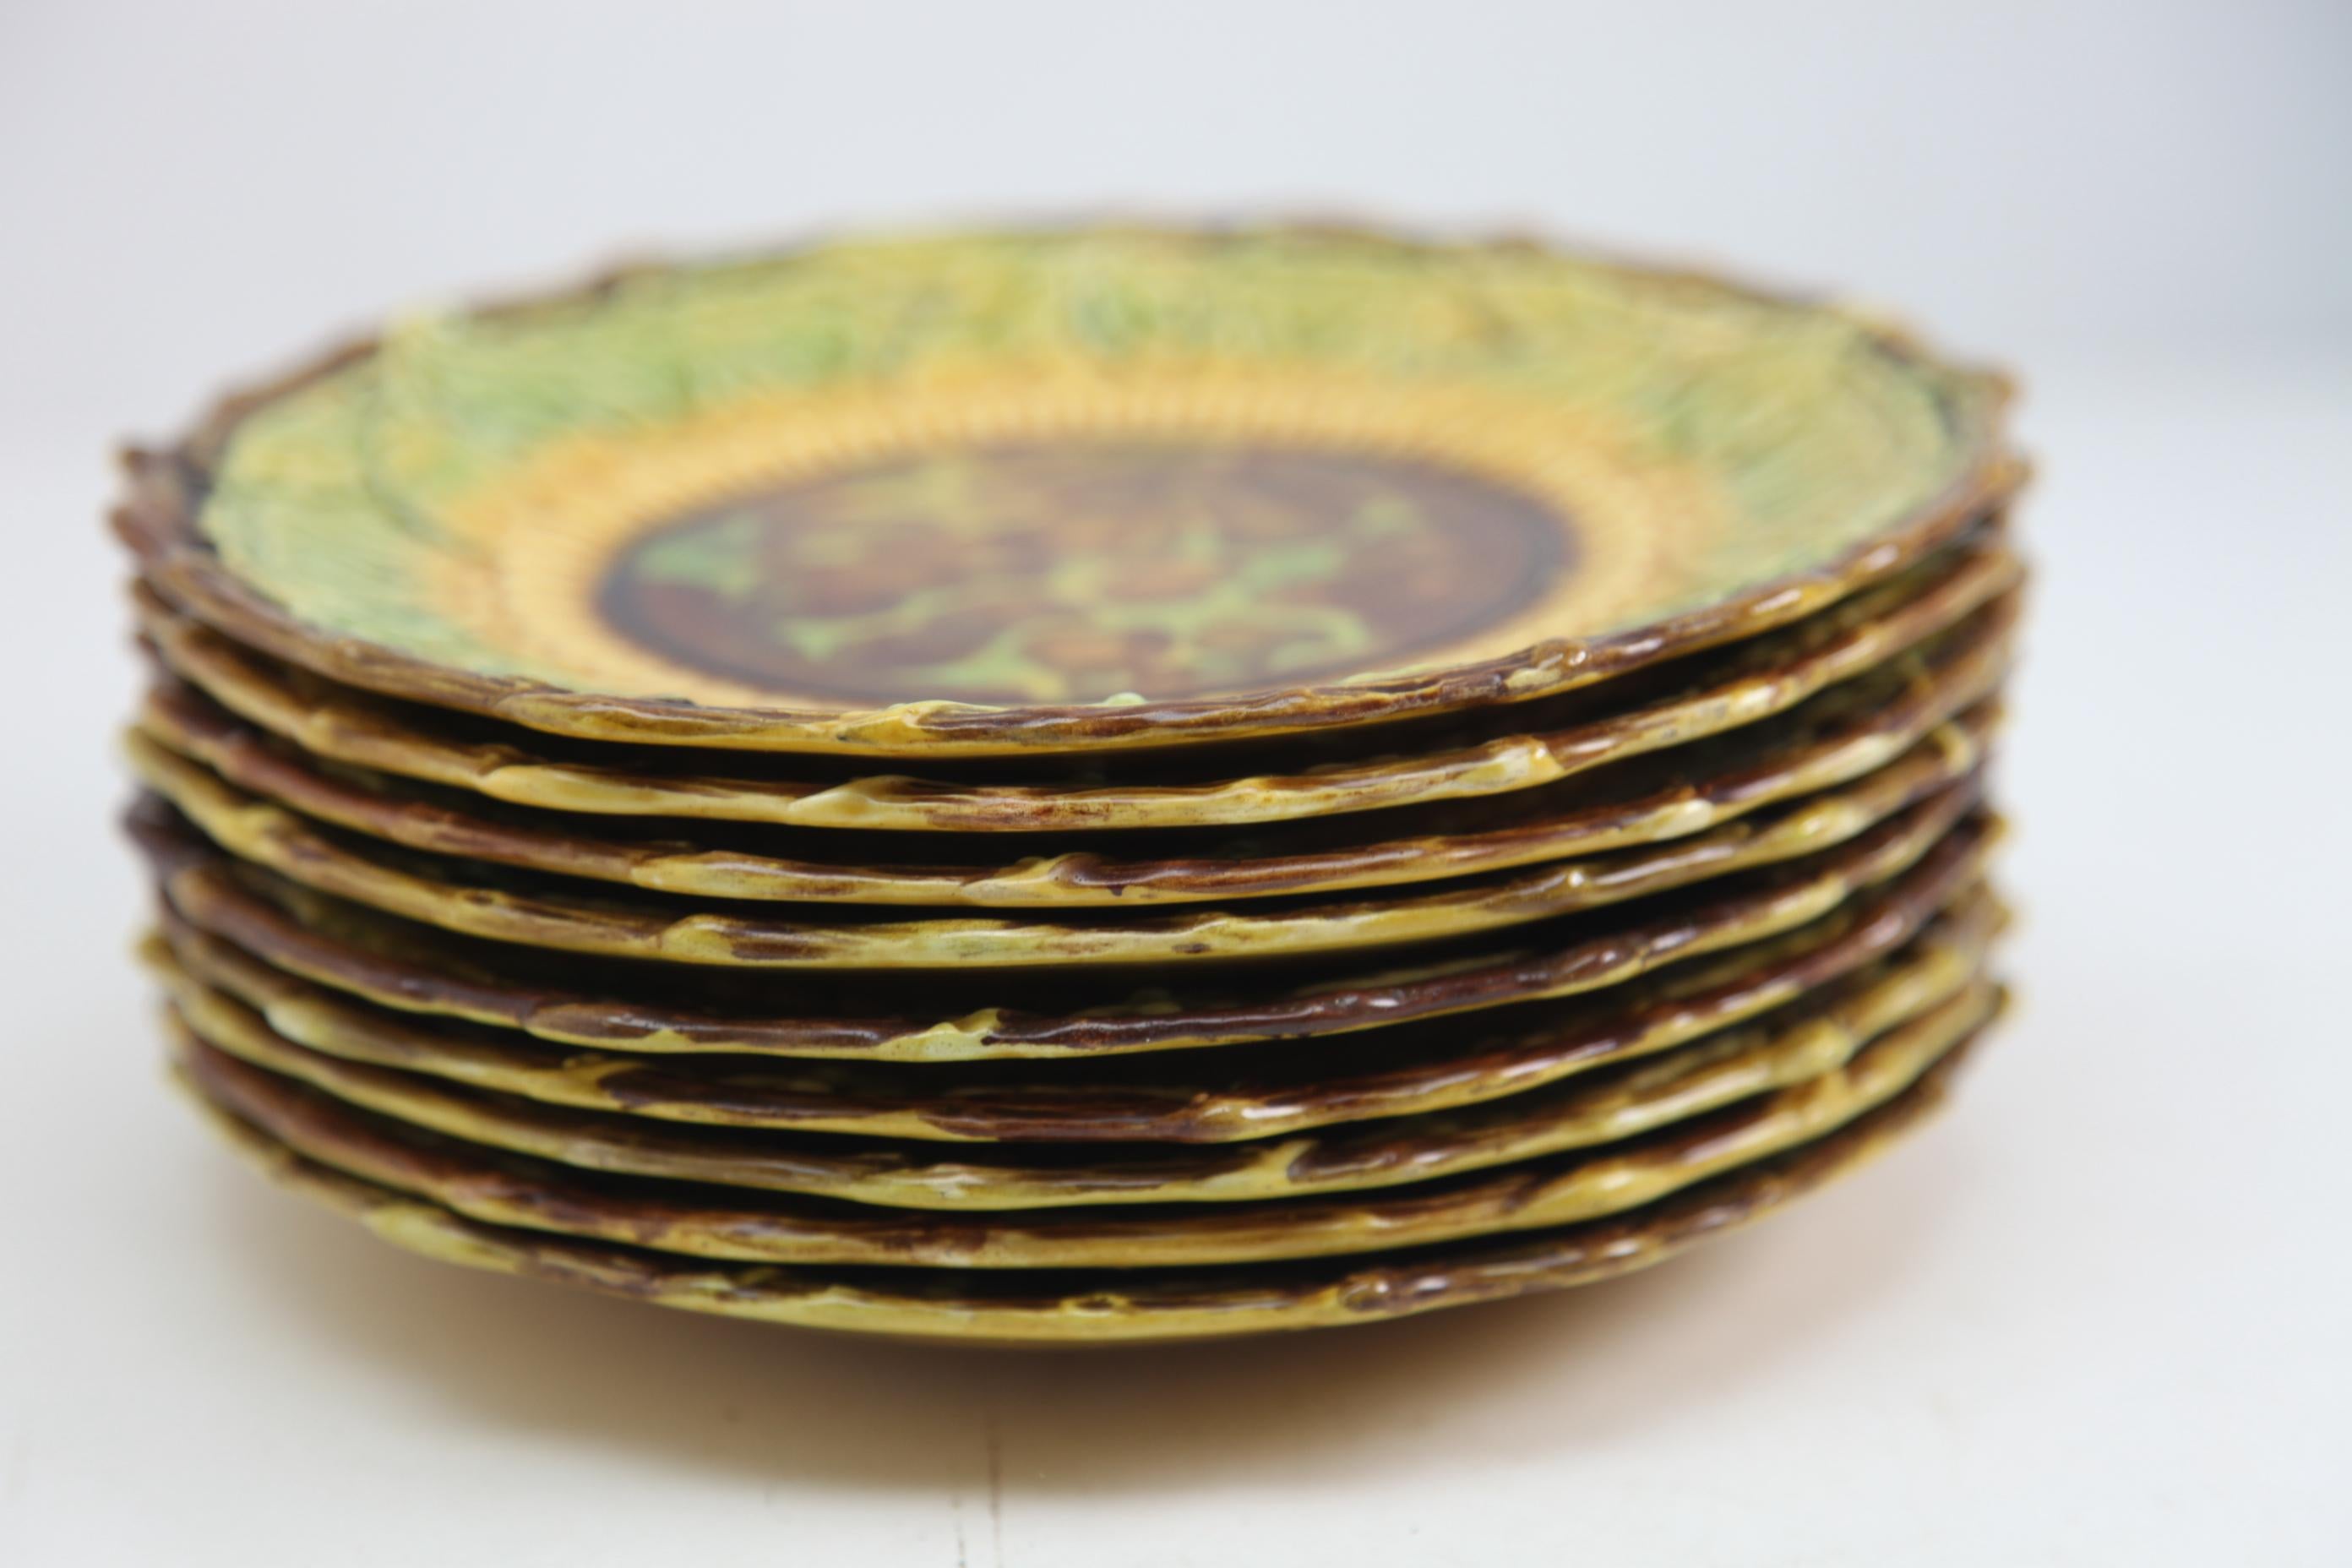 Late 19th Century Art Nouveau Majolica glazed tableware set of 9 pieces Leaves pattern in relief. For Sale